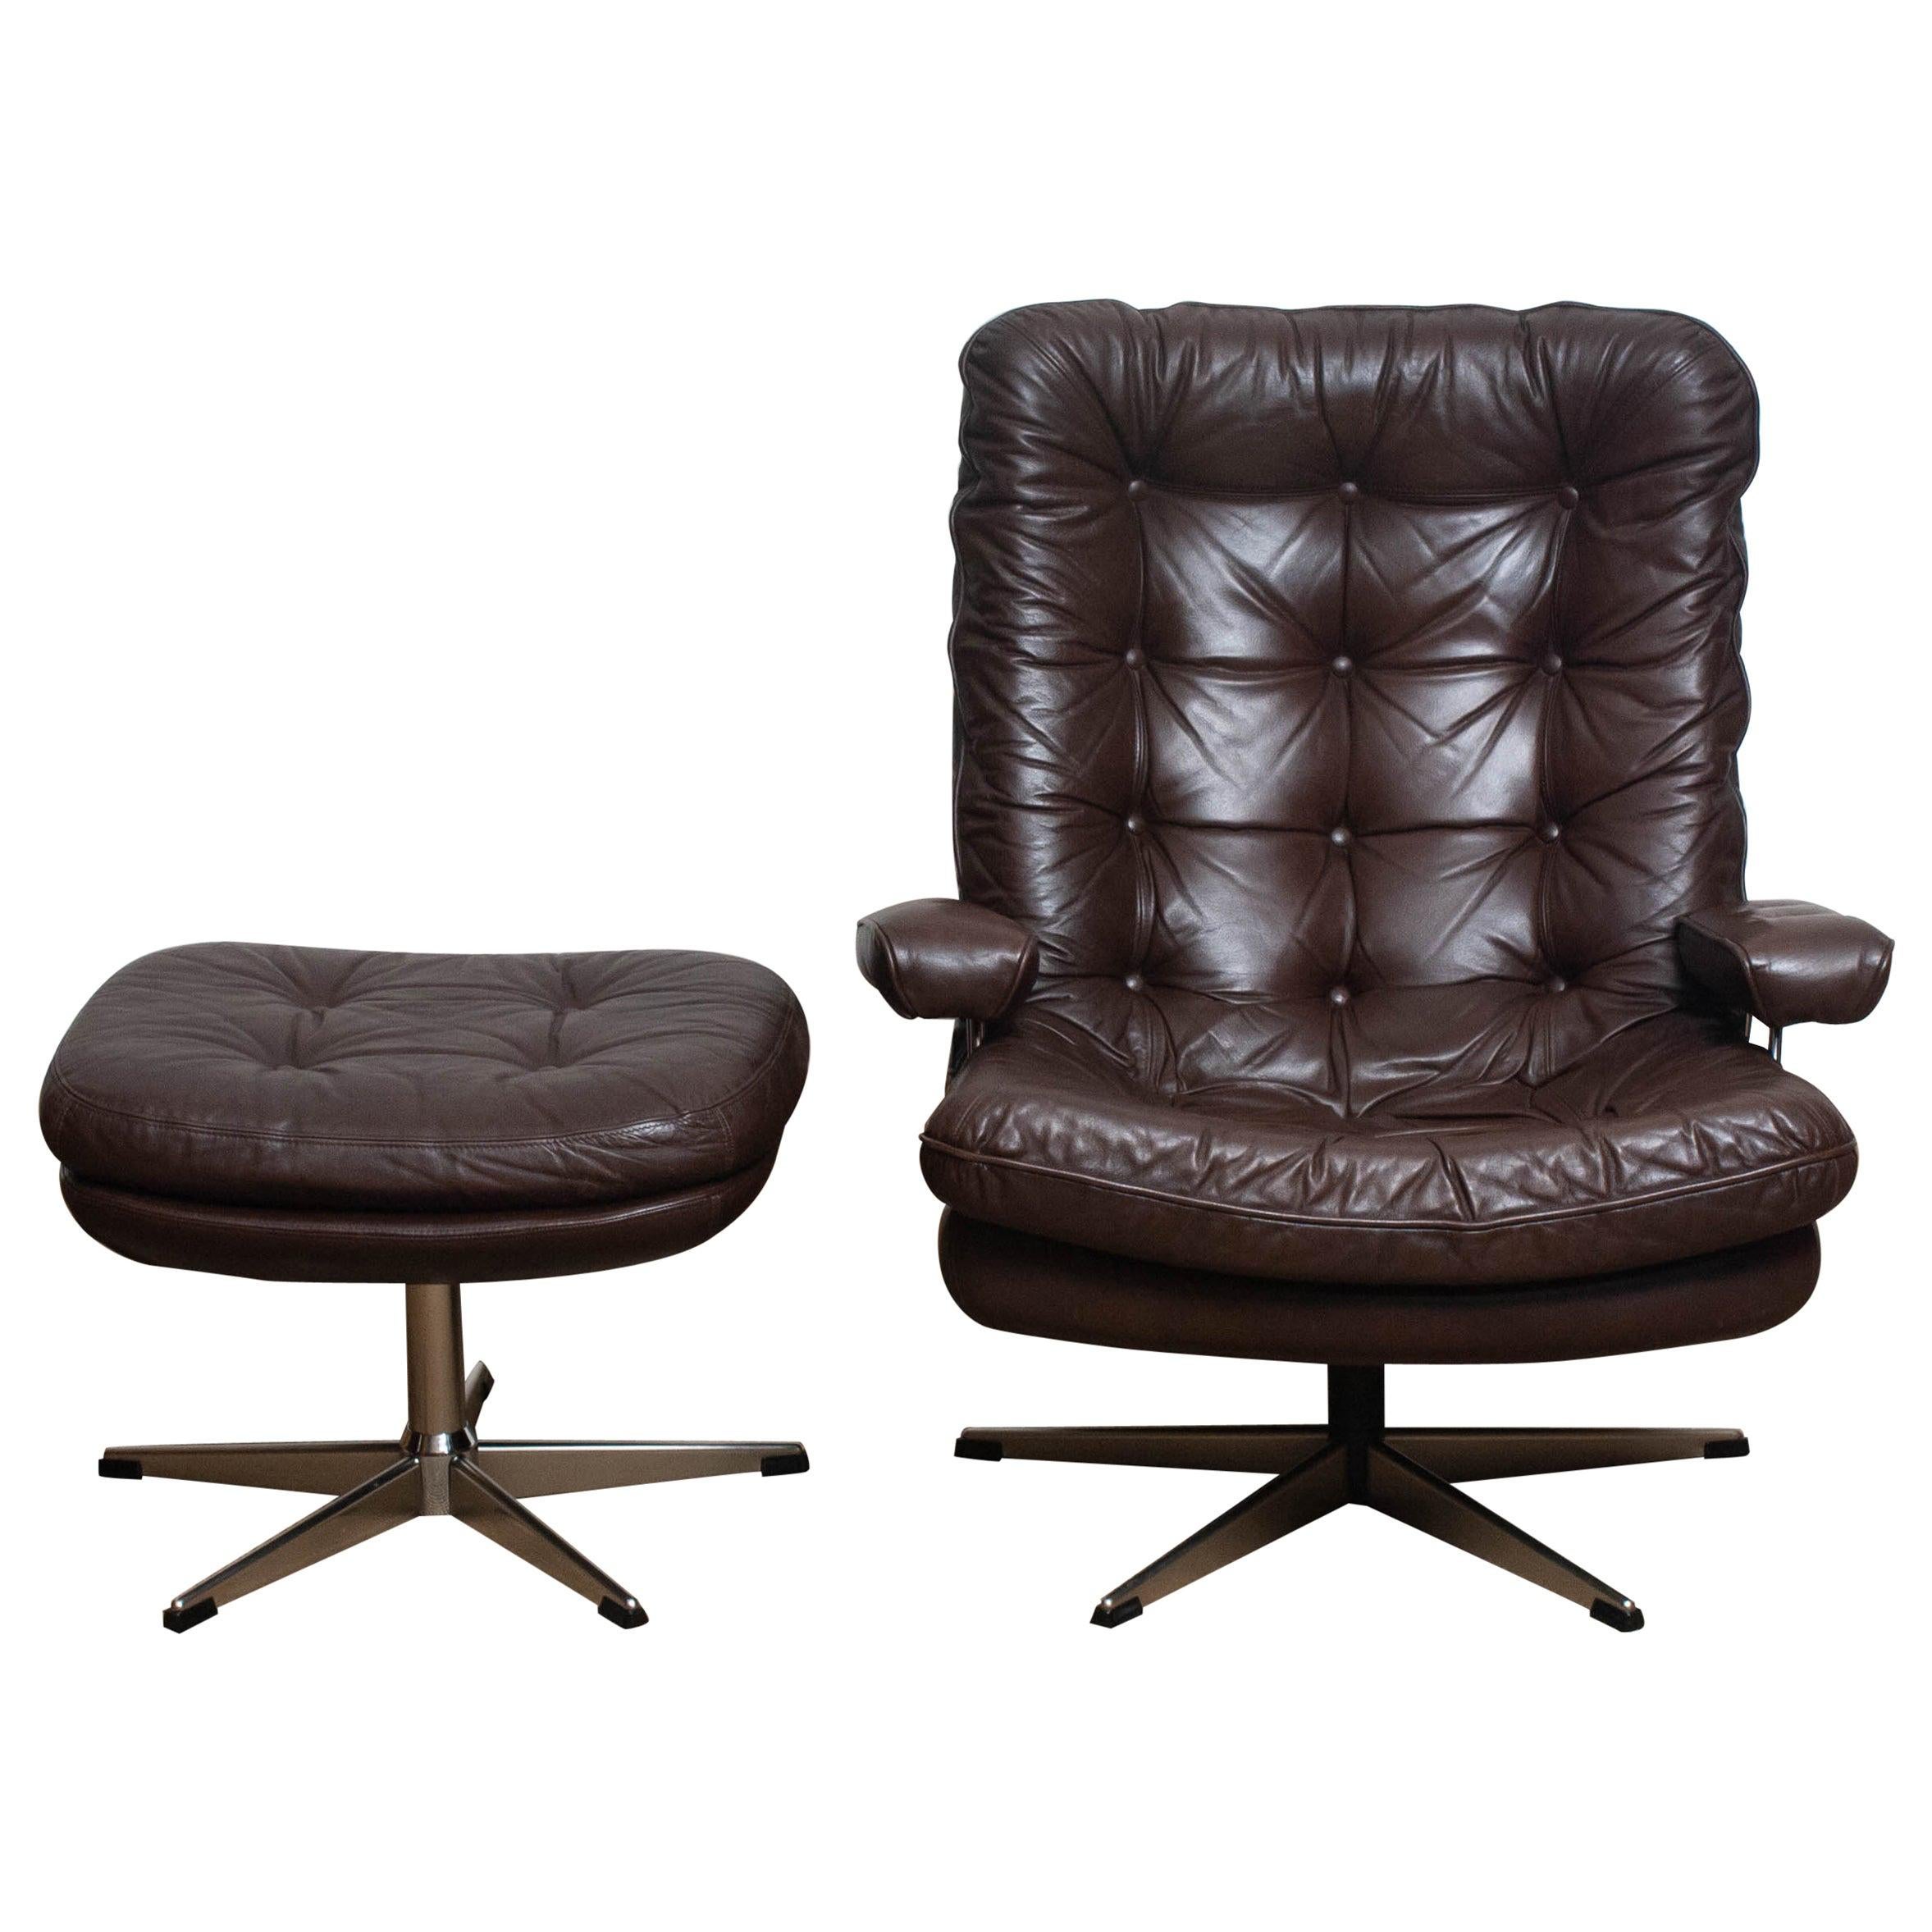 1970s, Brown Leather and Chrome Swivel Lounge Chair and Ottoman, Sweden